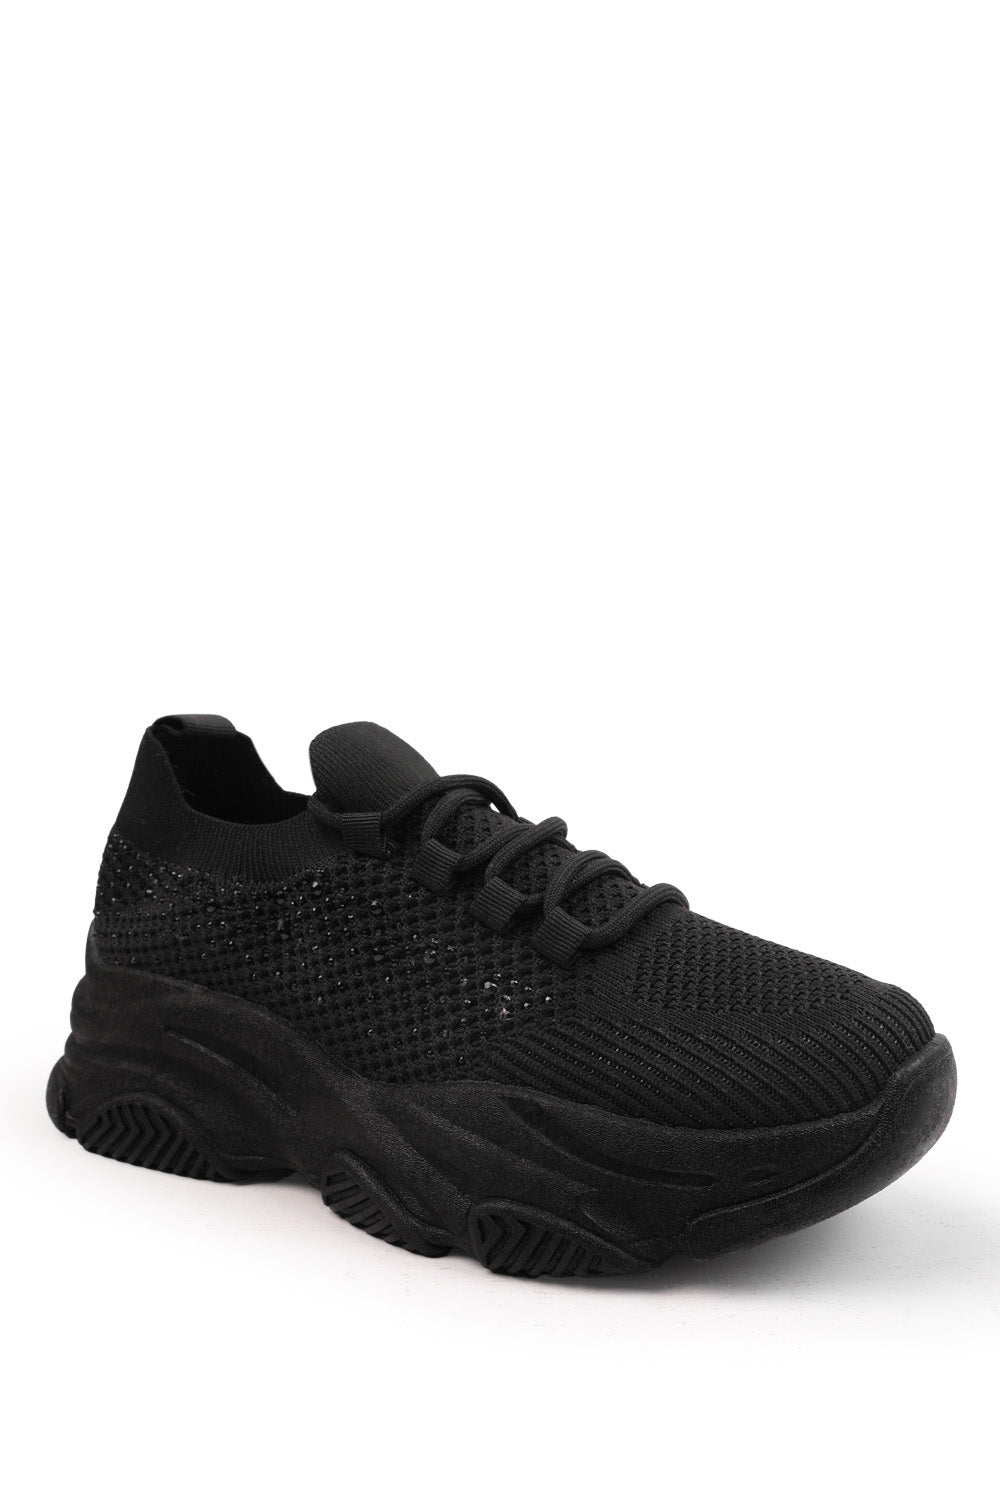 ADVANTAGE CHUNKY SOLE MESH KNIT LACE UP TRAINERS IN BLACK